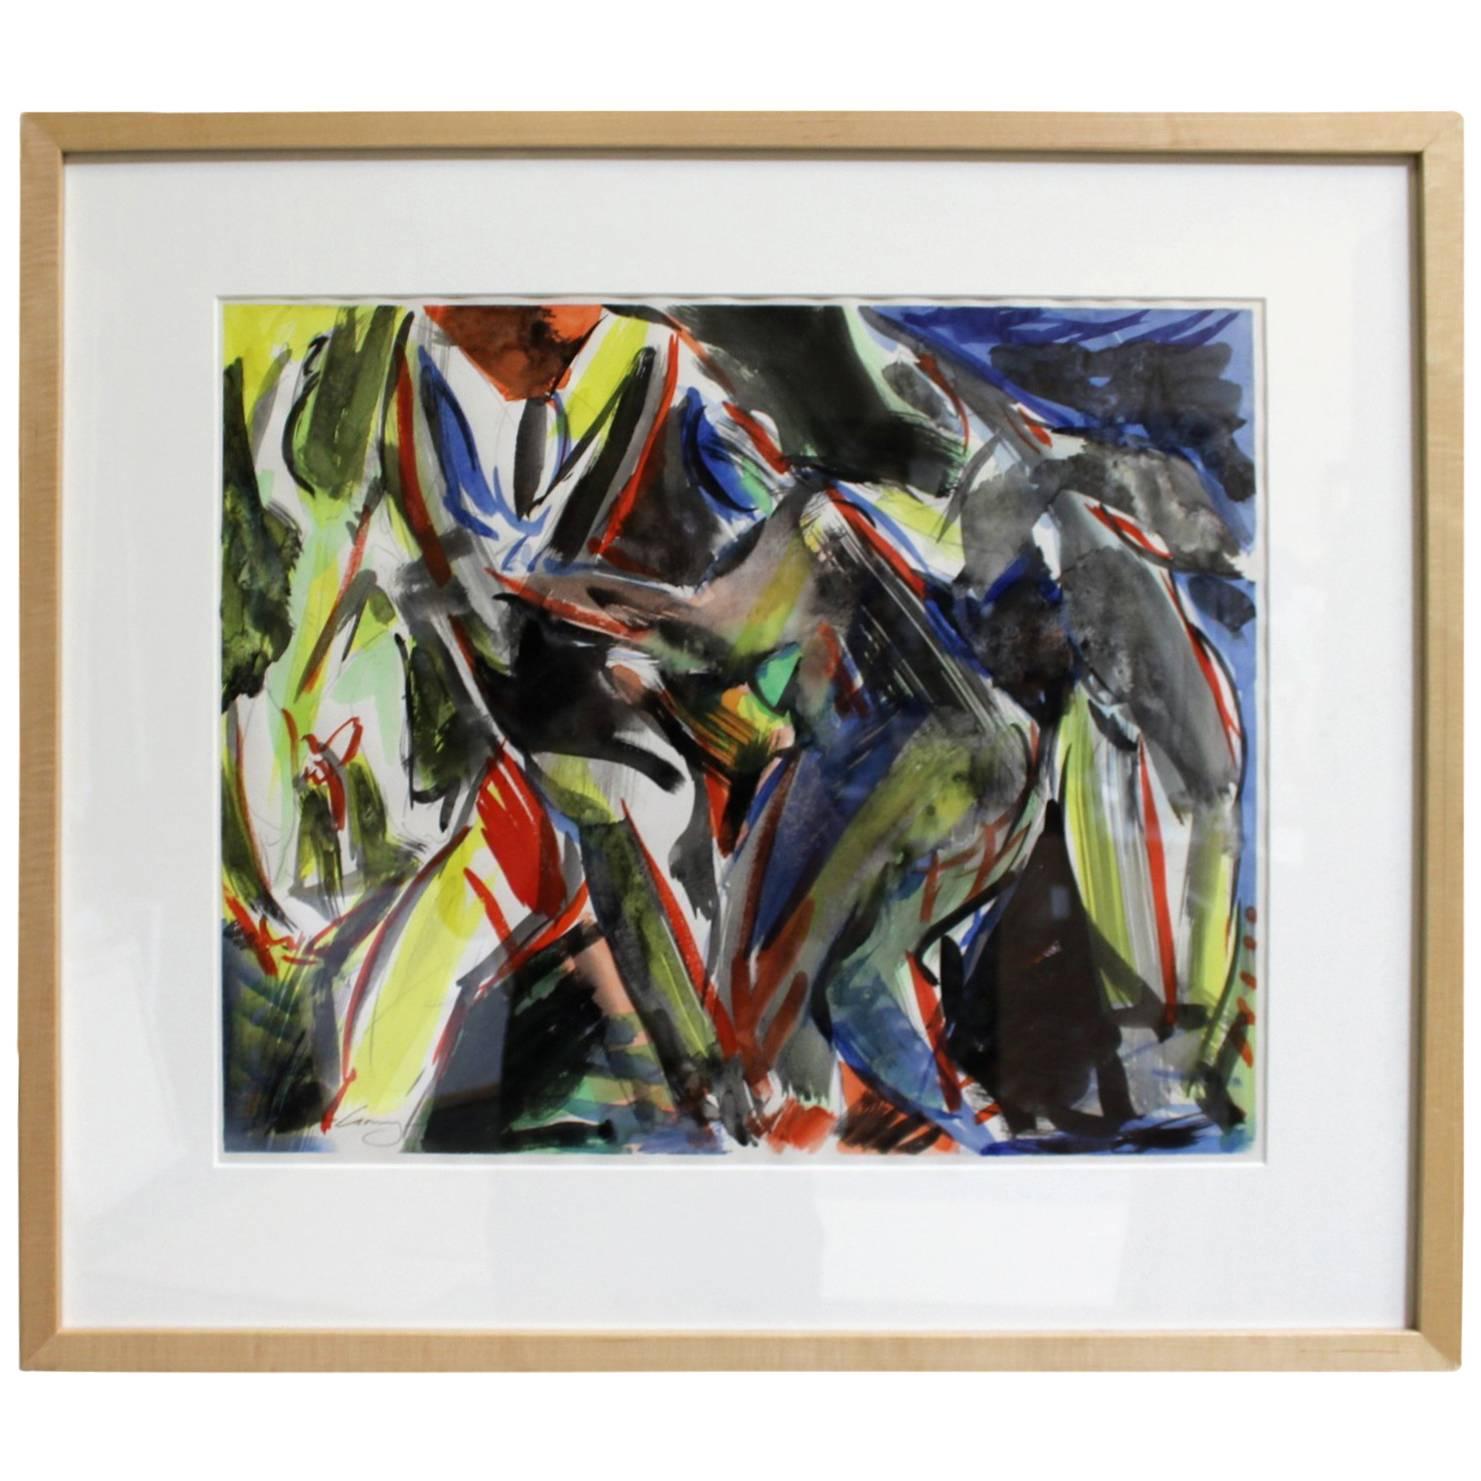 Framed, Abstract Watercolor on Paper by Artist Jacques Lamy im Angebot